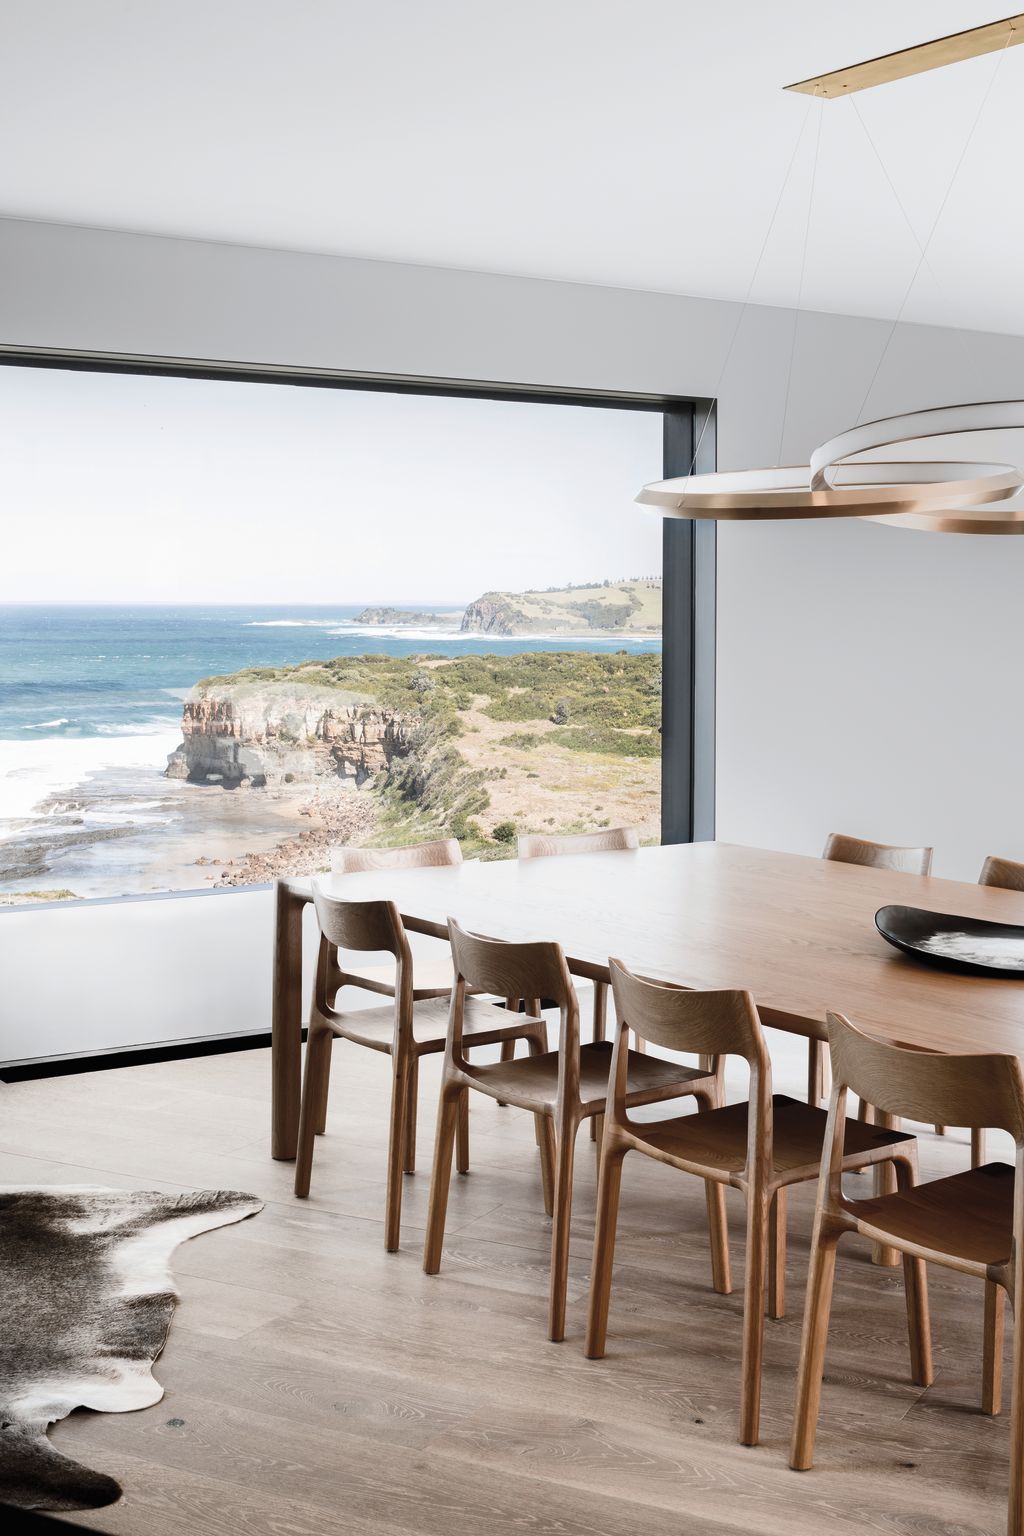 Living room windows frame spectacular scenery.  Photo: Tom Blachford and Kate Ballis. Architecture: Atelier Andy Carson